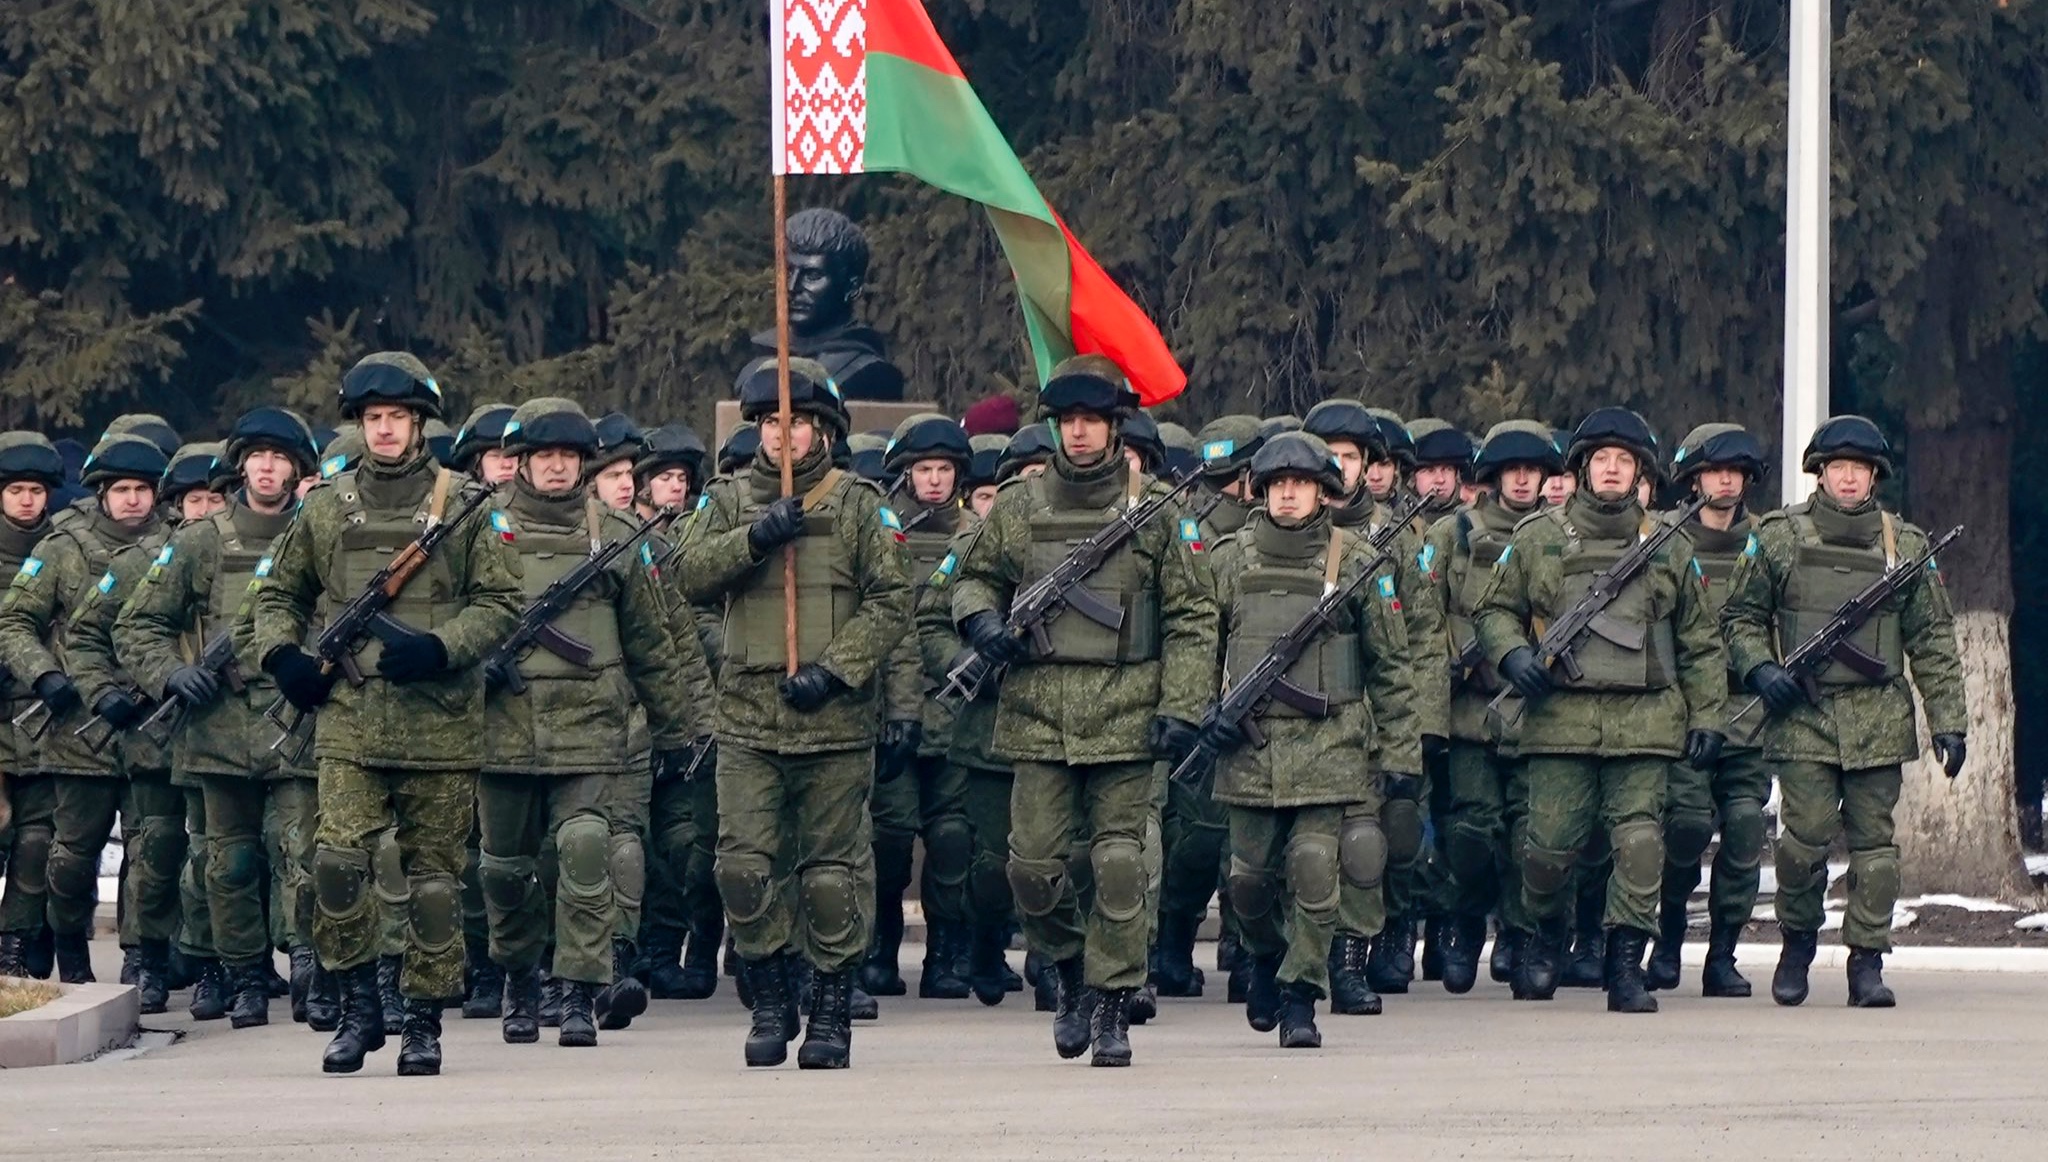 Lukashenko is organising a gathering of soldiers by the Ukrainian border. Will there be a provocation?